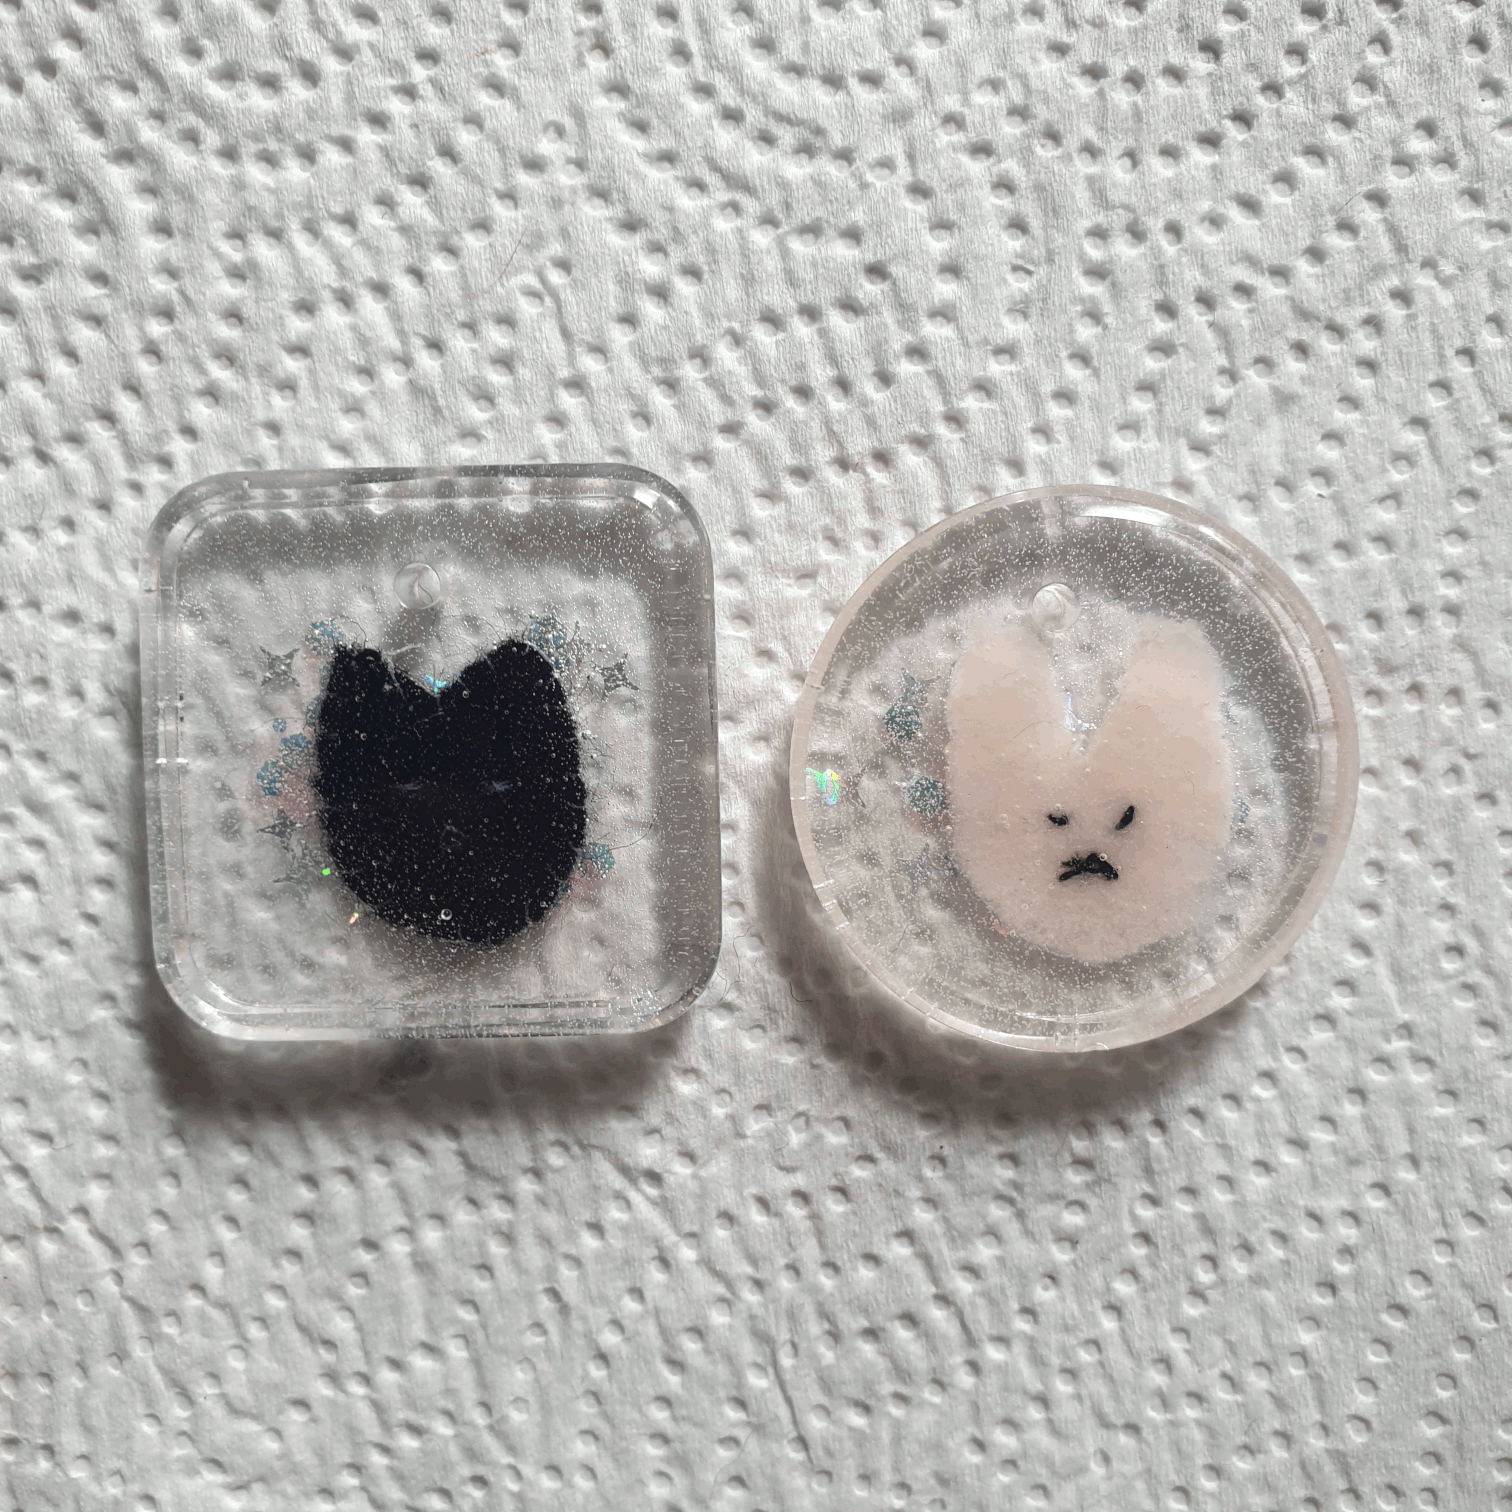 2 resin keychains with felt characters inside, one pink bunny with white stitching (that isn't clearly visible) and a black face. one black cats with white stitching - the face isn't big enough to be clear